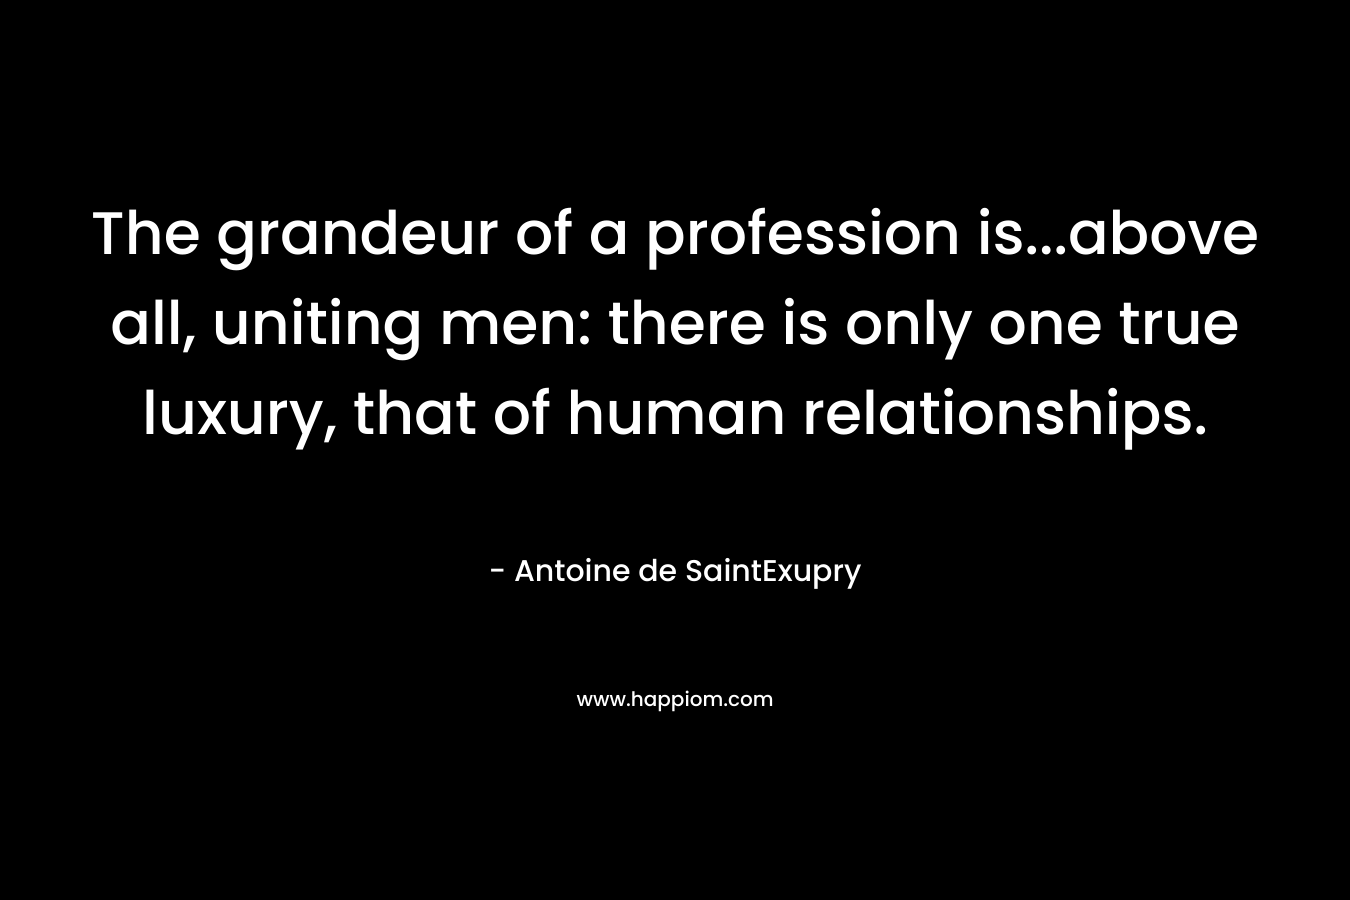 The grandeur of a profession is…above all, uniting men: there is only one true luxury, that of human relationships. – Antoine de SaintExupry